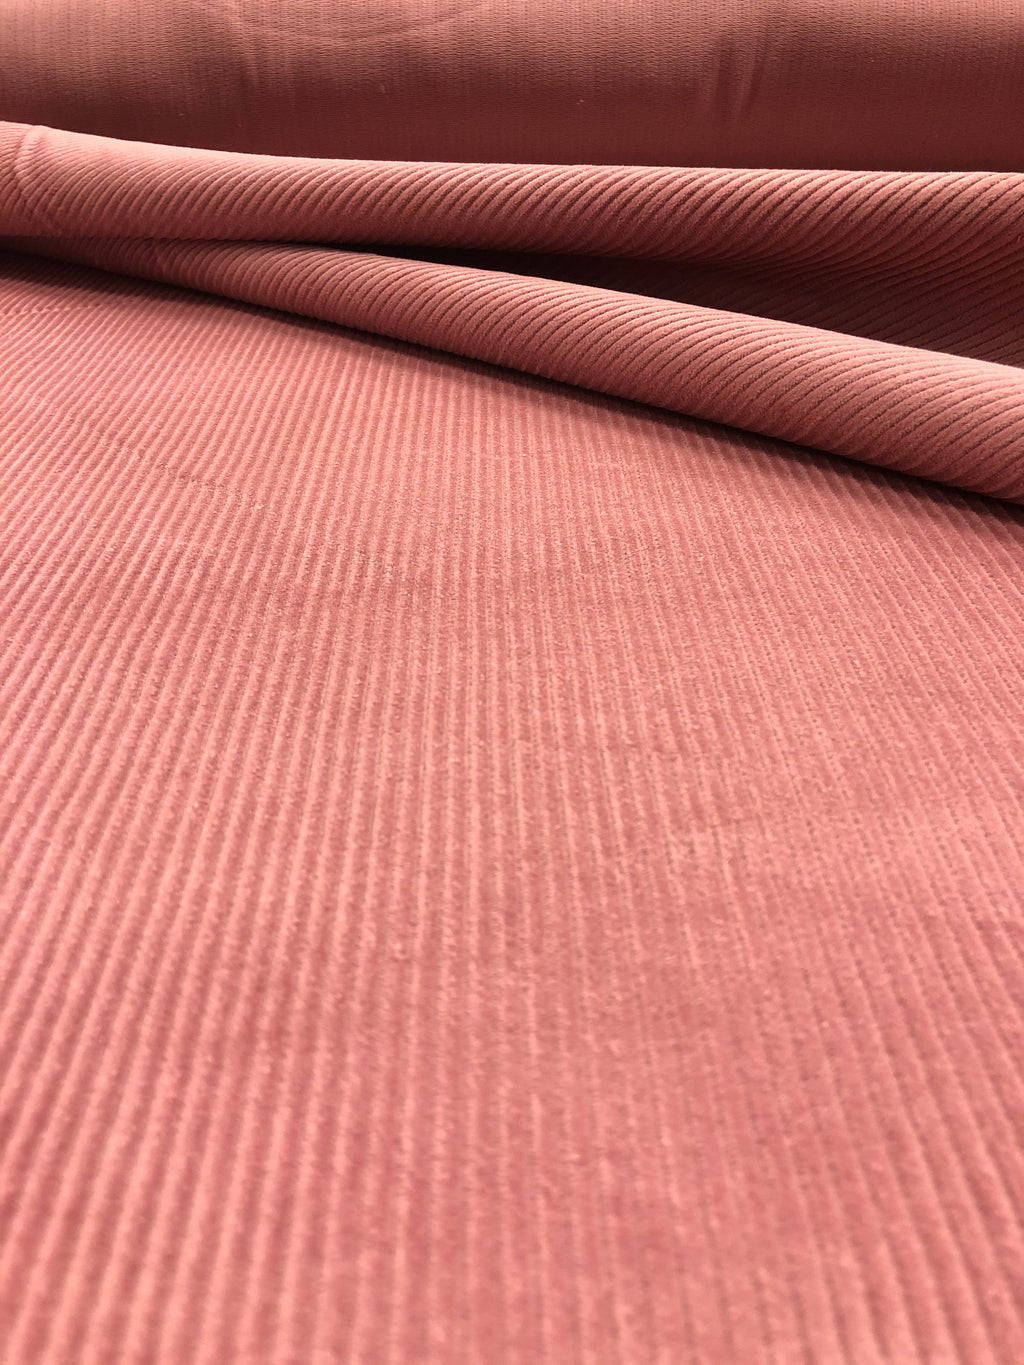 Dusty Rose - Corduroy – Affordable Textiles